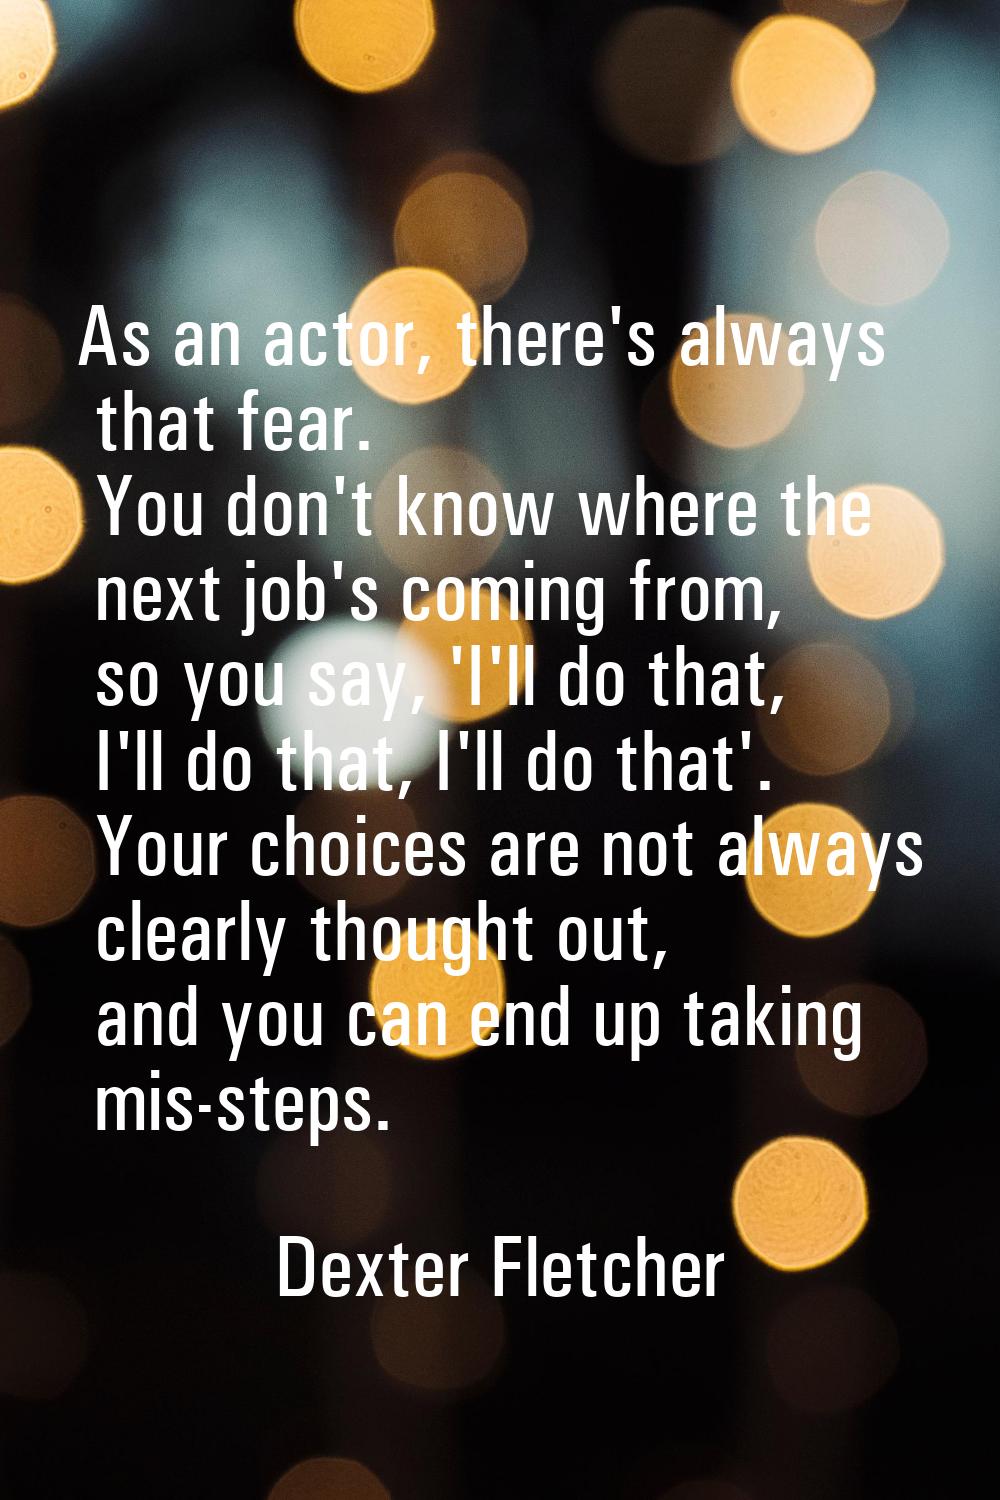 As an actor, there's always that fear. You don't know where the next job's coming from, so you say,